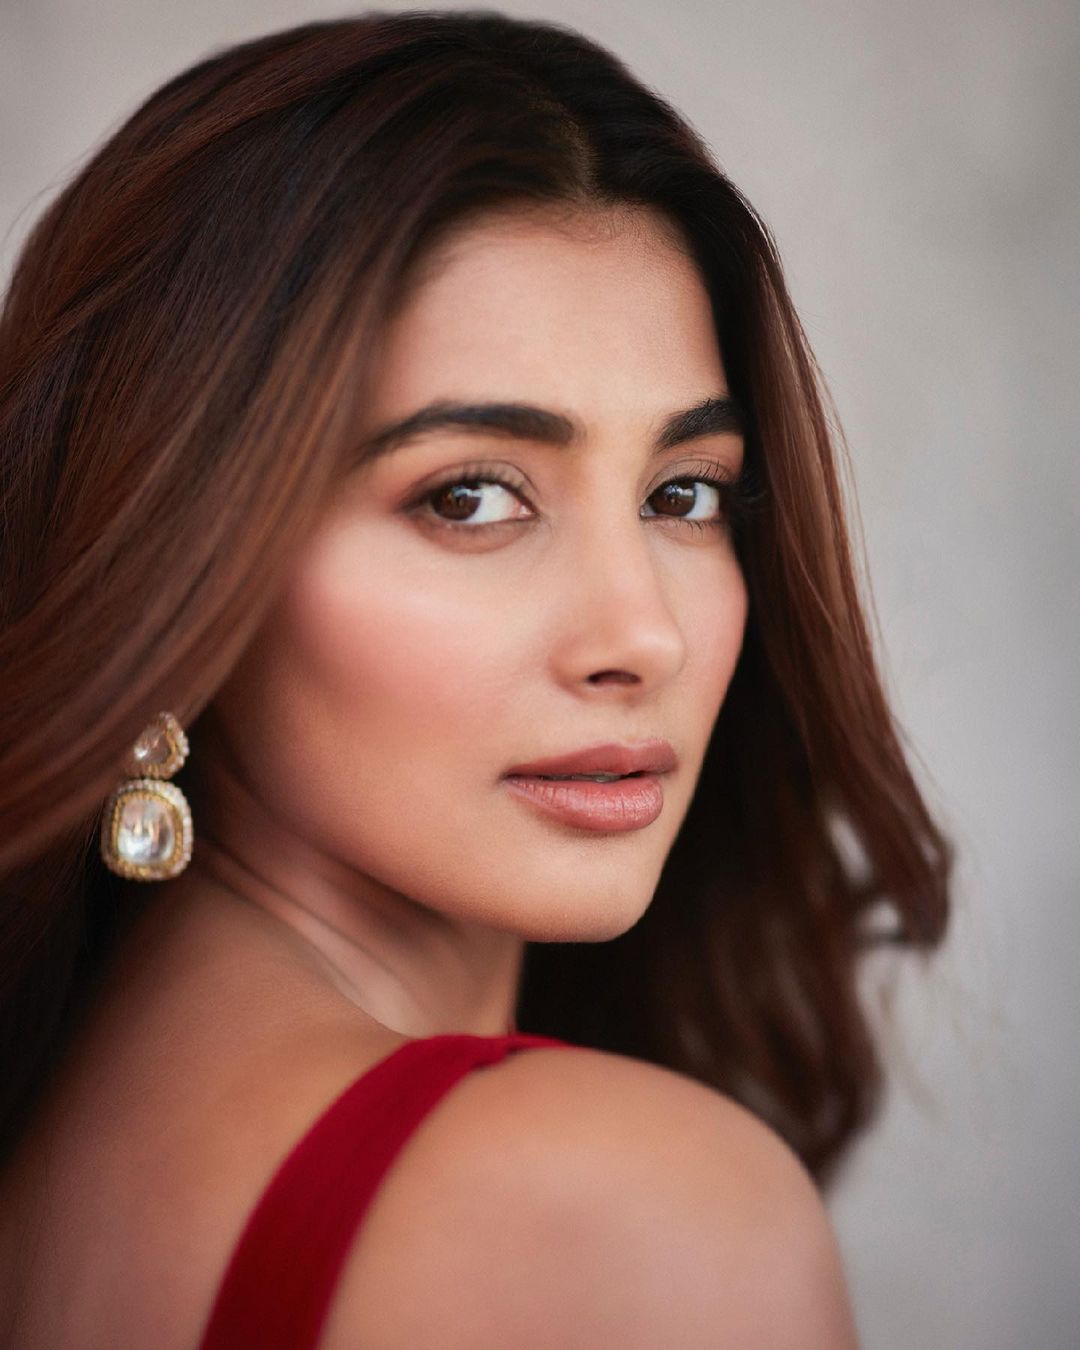 Bollywood Actress Pooja Hegde dazzles in a red ruffle saree worth ₹55k